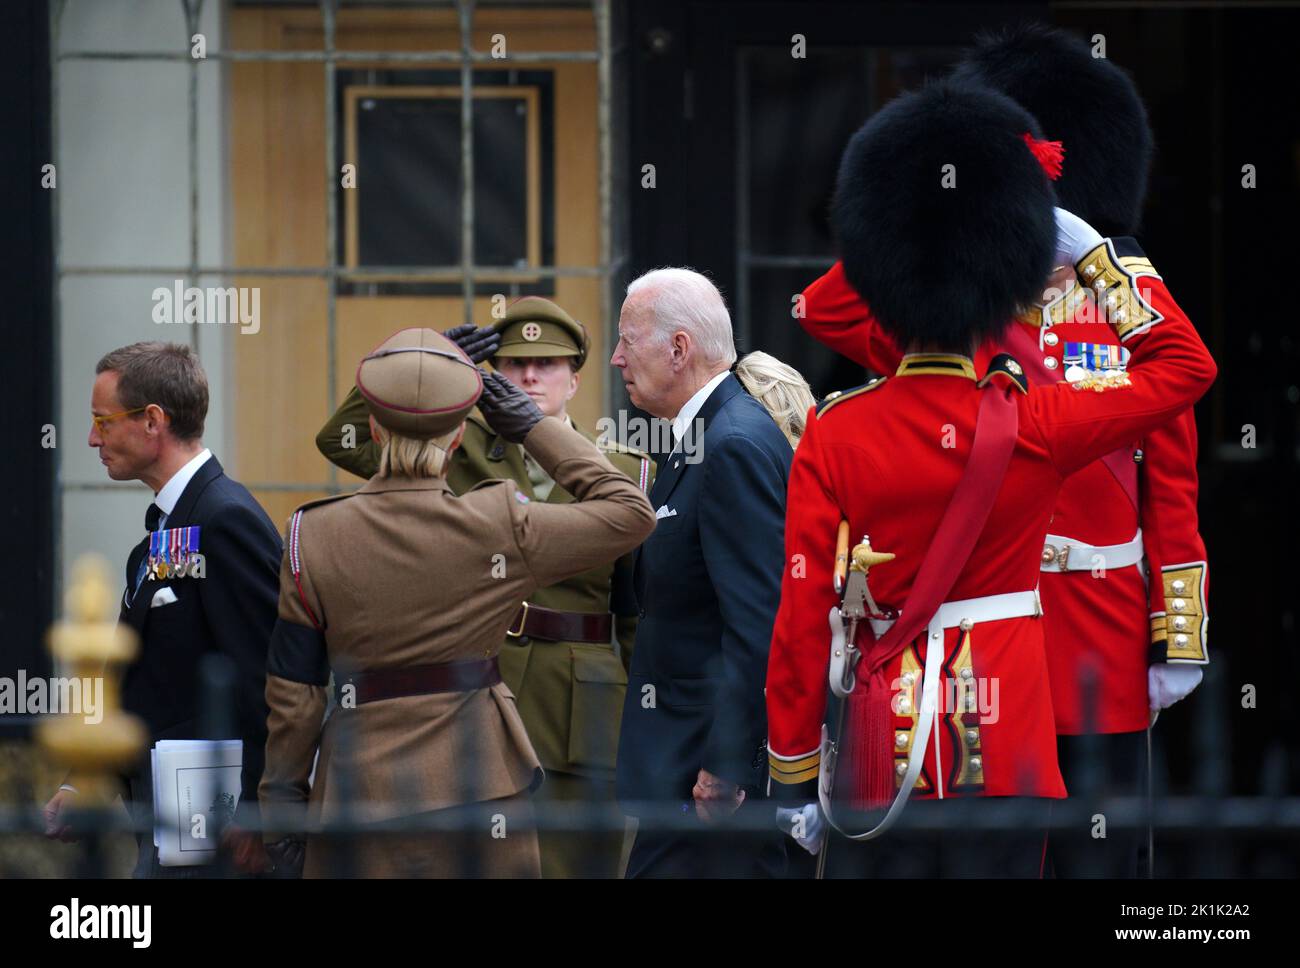 US President Joe Biden accompanied by the First Lady Jill Biden arriving at the State Funeral of Queen Elizabeth II, held at Westminster Abbey, London. Picture date: Monday September 19, 2022. Stock Photo